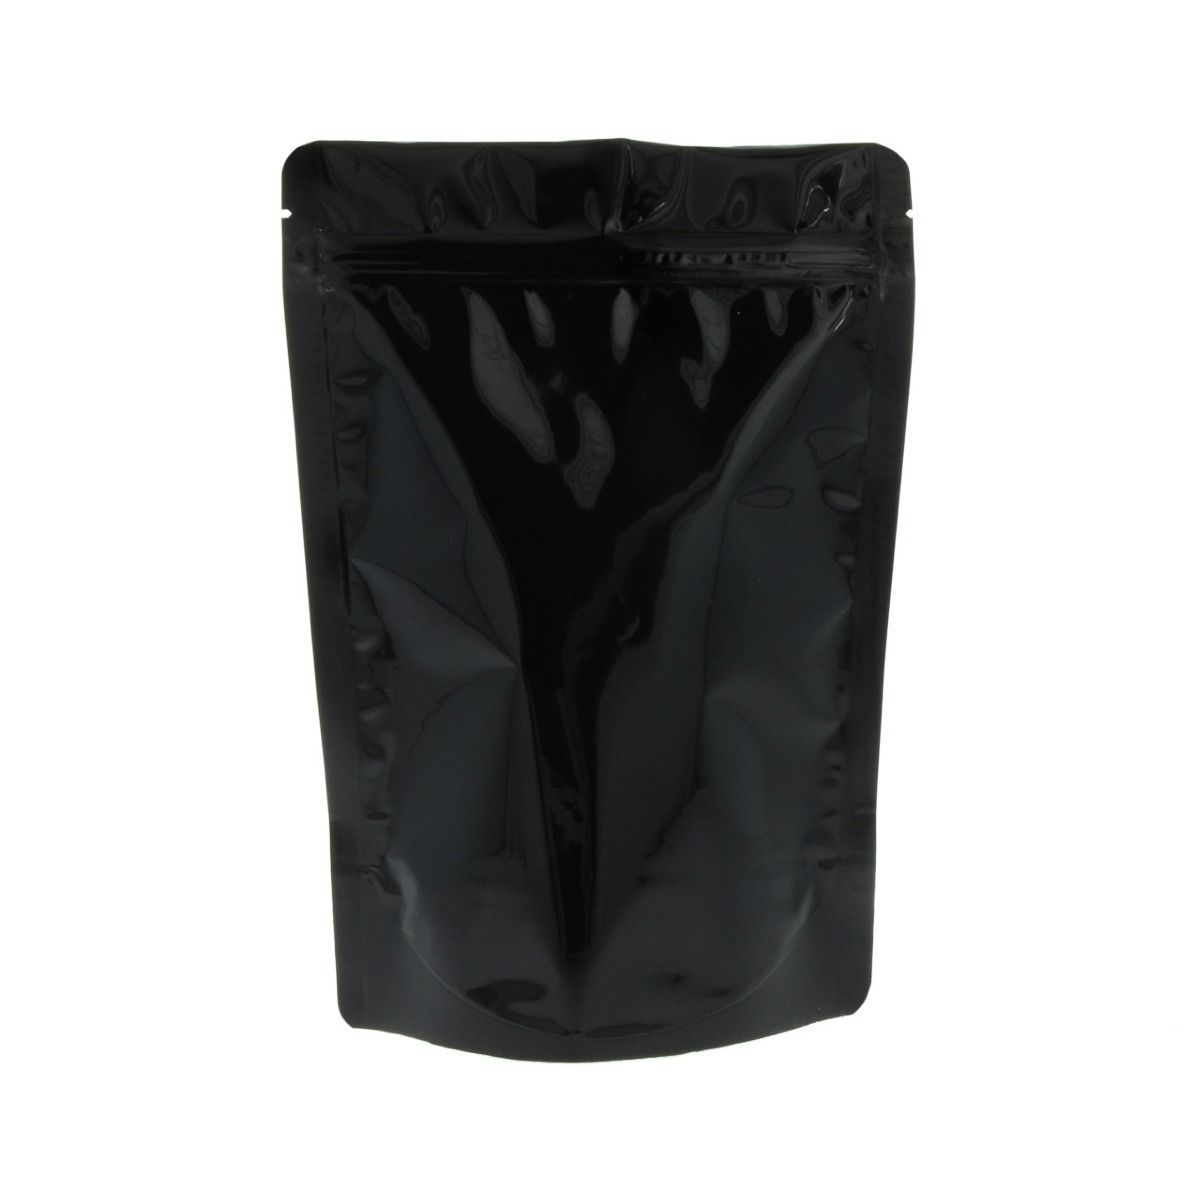 Stand-up pouch - shiny black